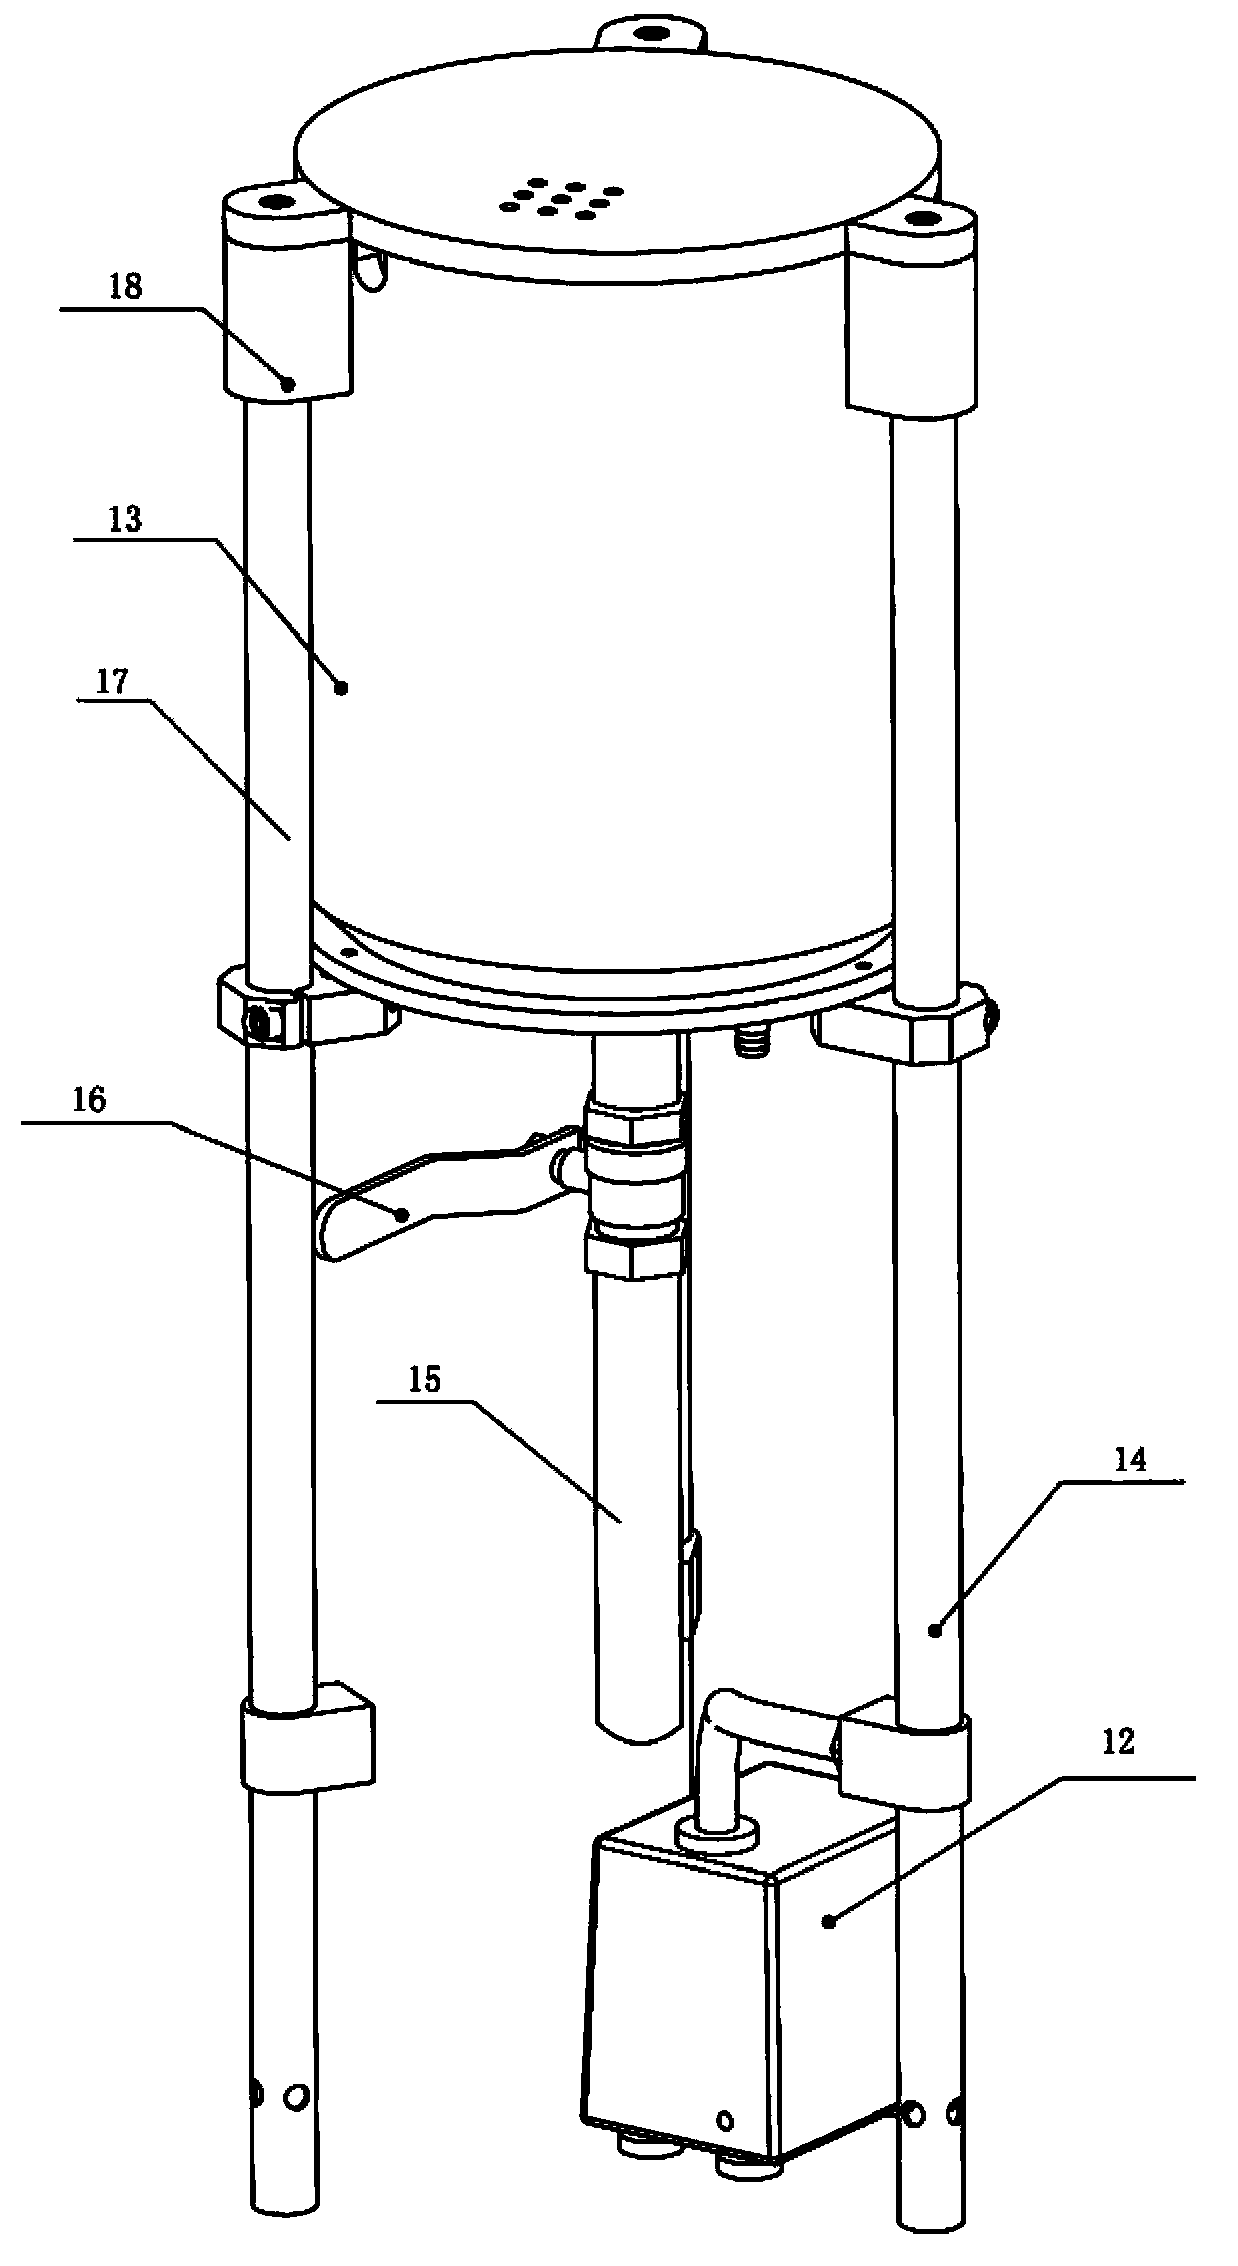 Variable frequency control dynamic liquid level experiment equipment